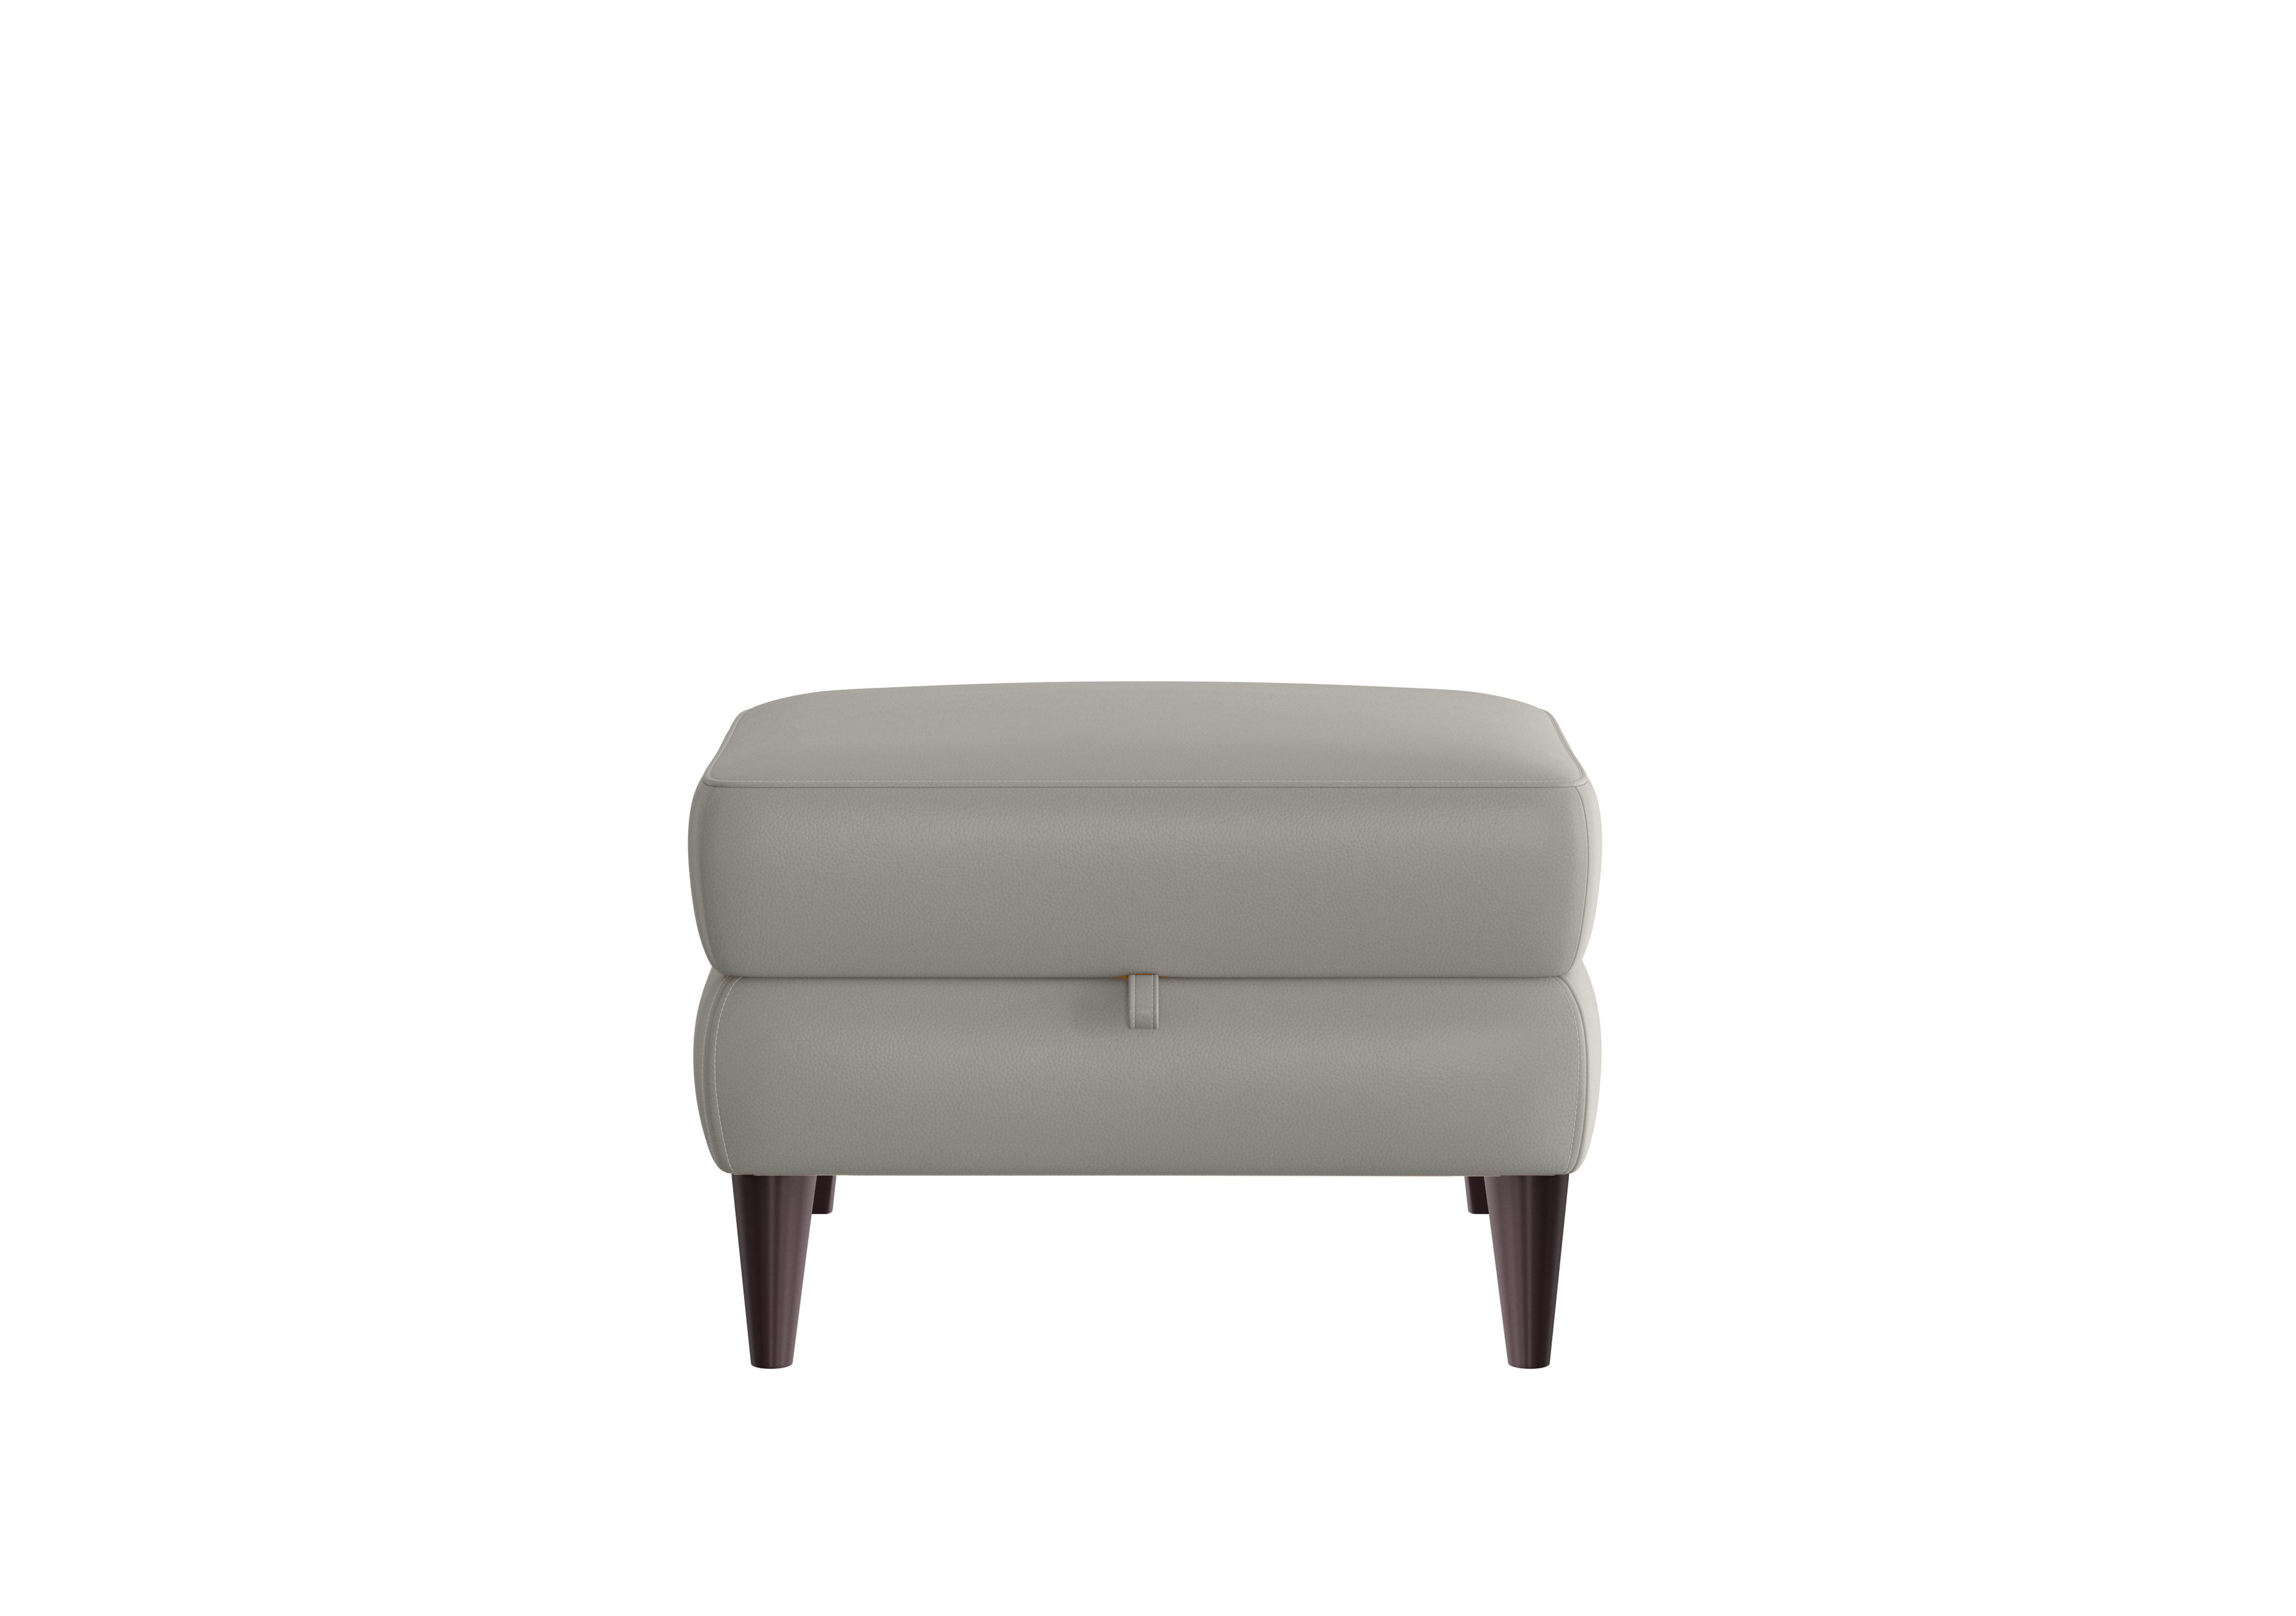 Compact Collection Klein Leather Storage Footstool in Bv-946b Silver Grey on Furniture Village